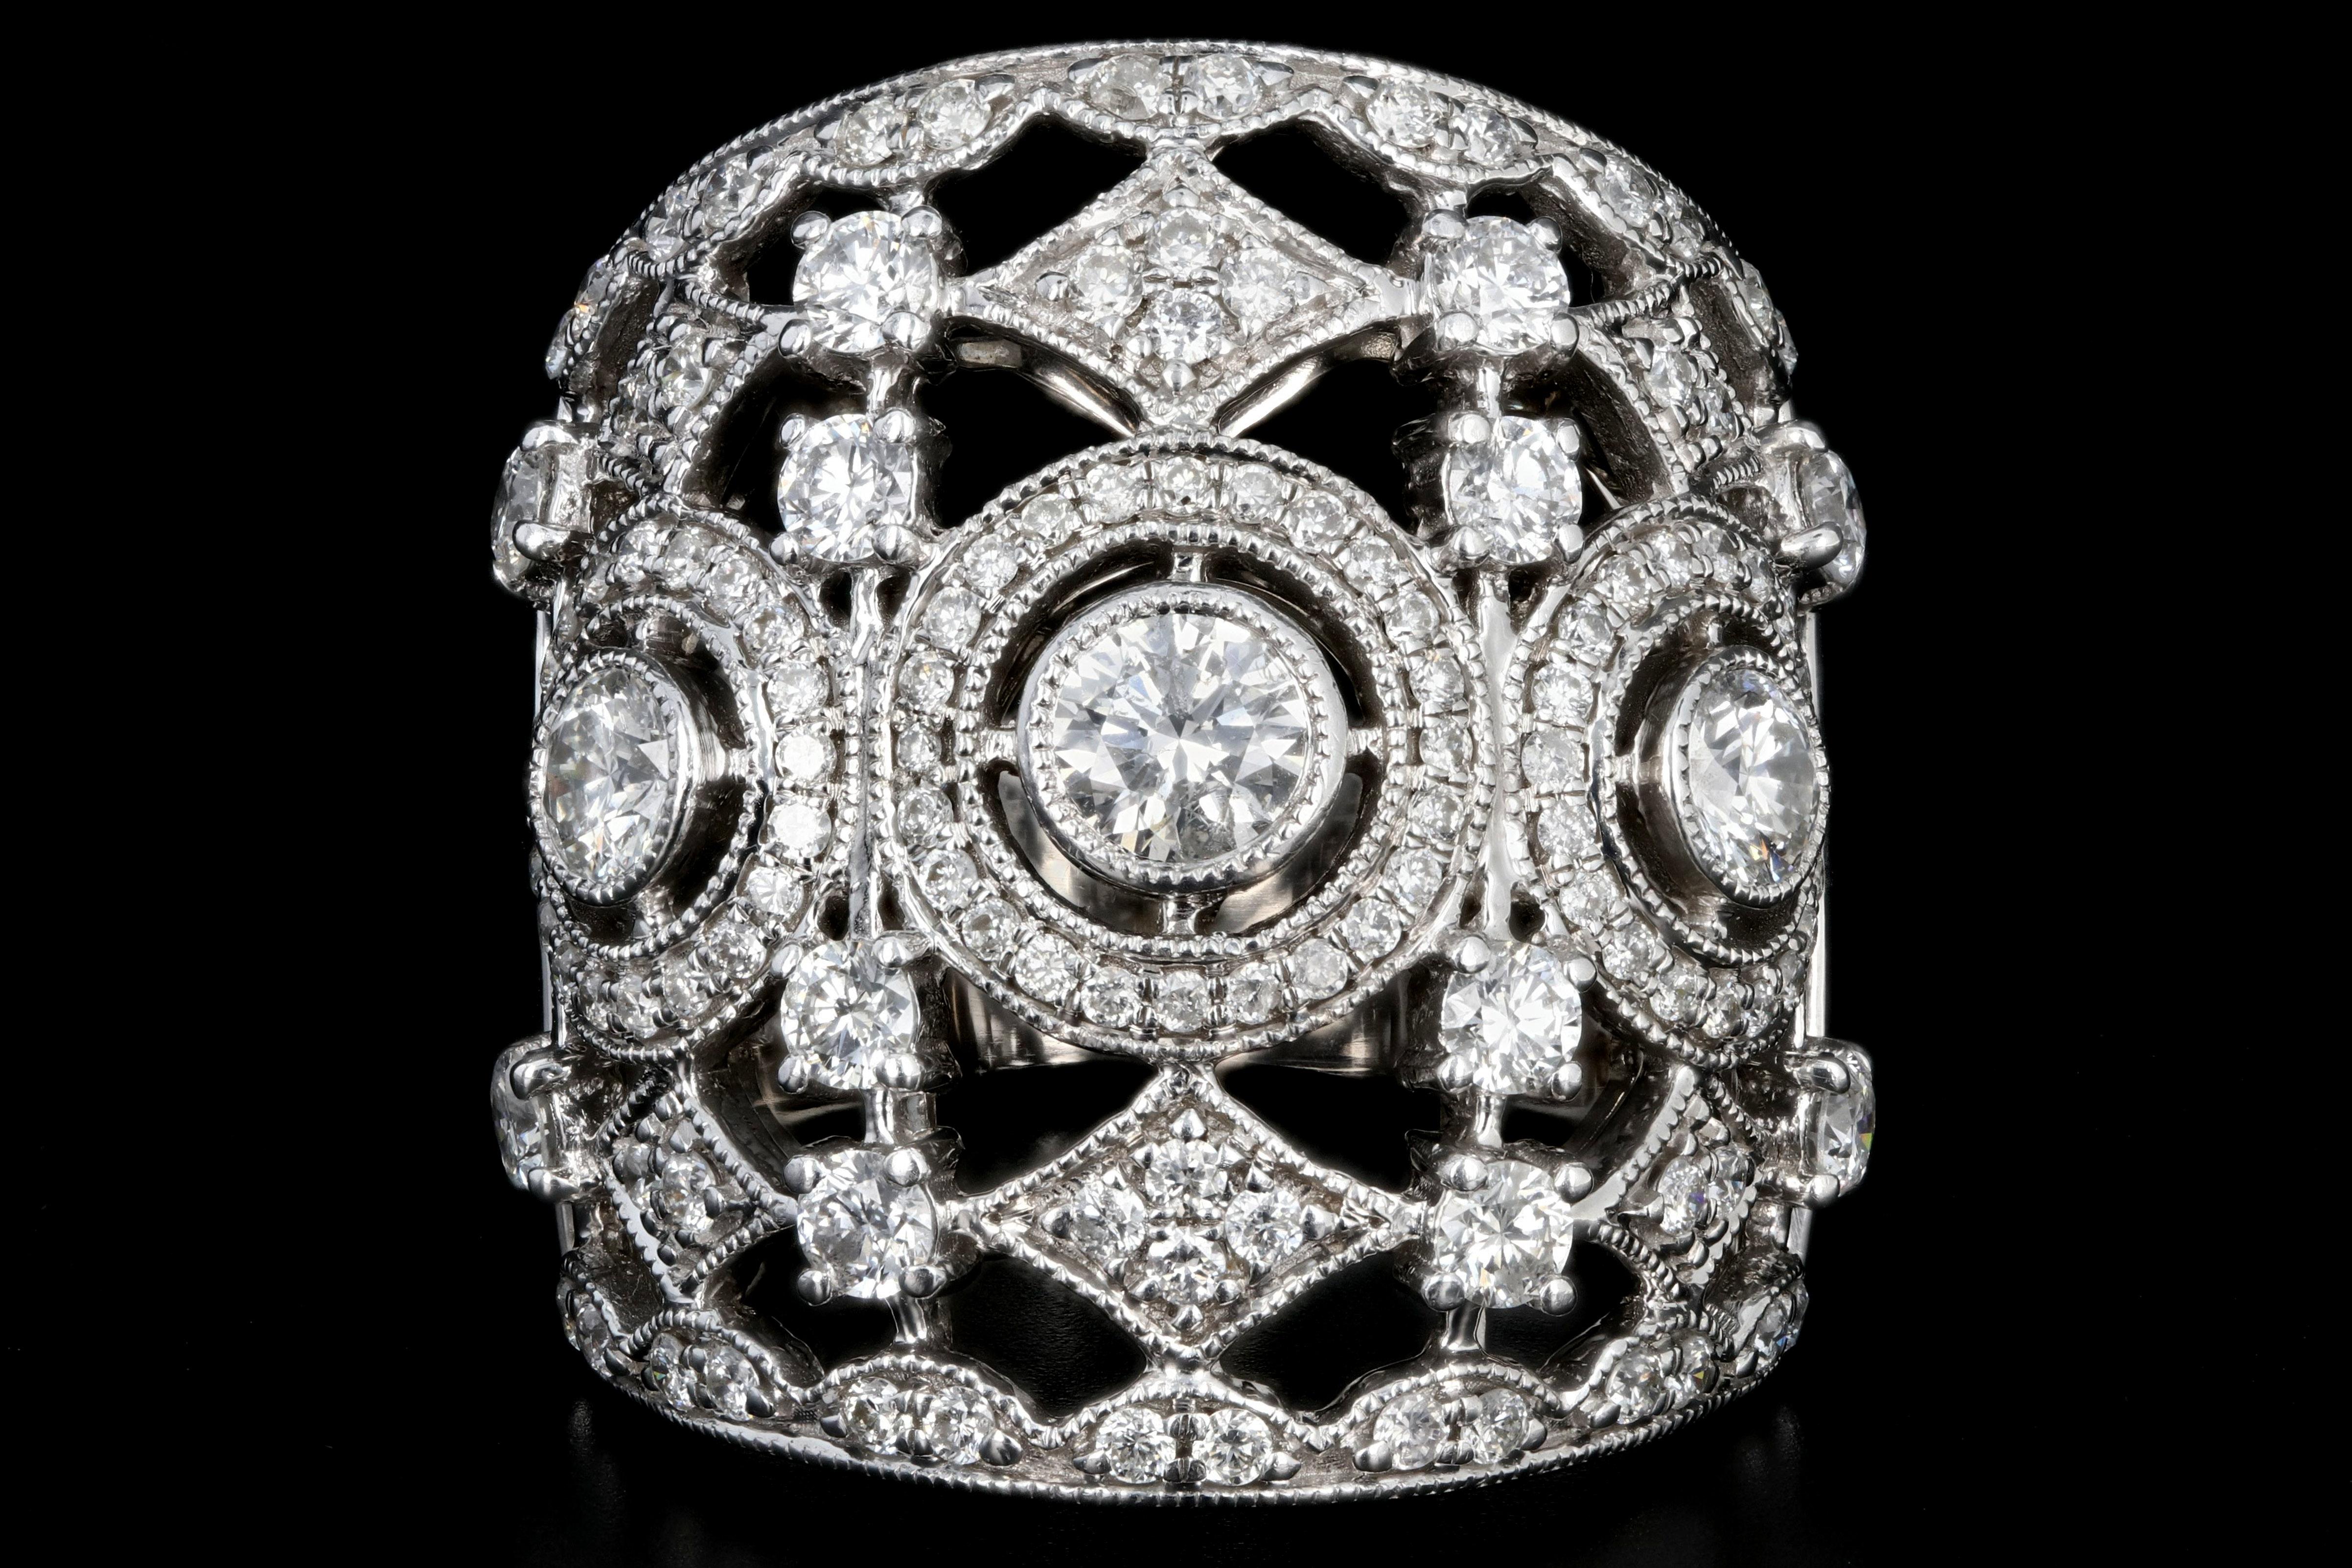 Era: Modern

Composition: 18K White Gold

Primary Stone: Round Brilliant Cut Diamonds

Carat Weight: 1.4 Carats

Color: G-H

Clarity: SI1/2

Ring Weight: 9.1 DWT

Ring Size: 8